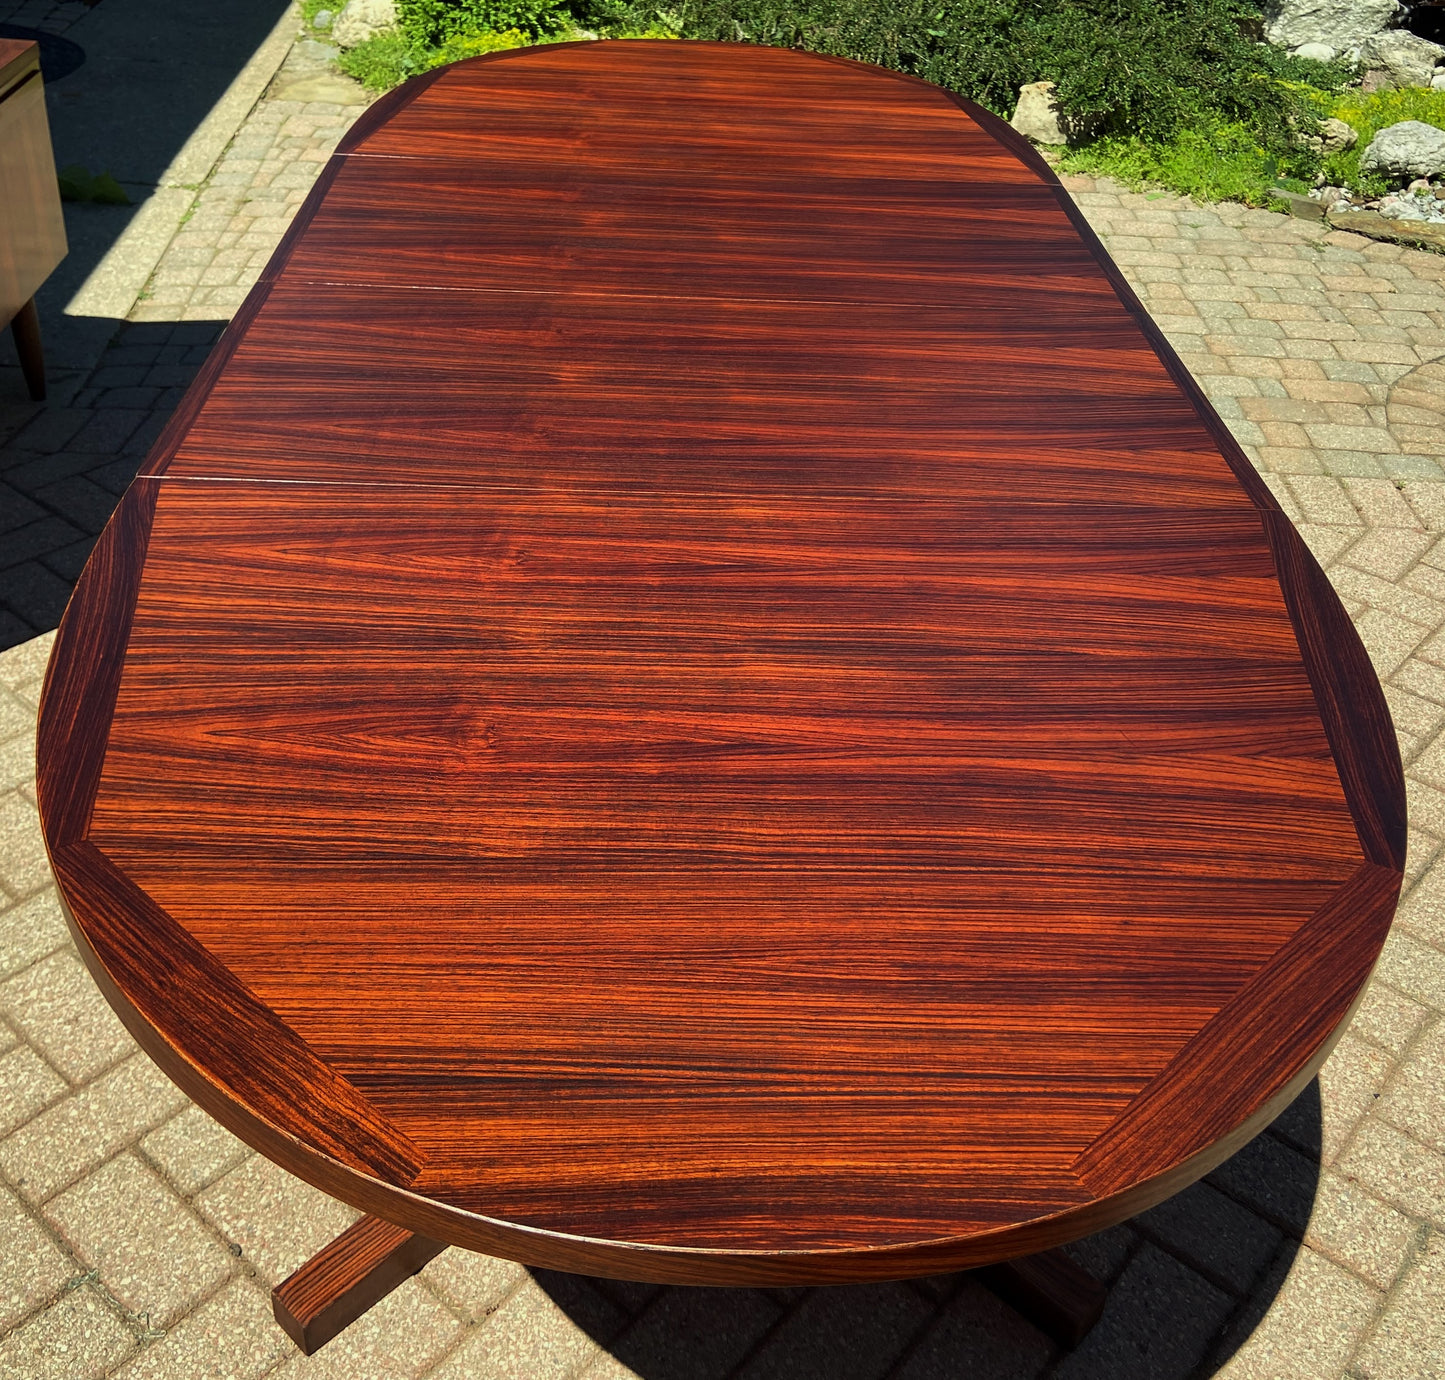 REFINISHED Danish Mid Century Modern Rosewood Table w 2 Leaves by Dyrlund, 64"-103.5"